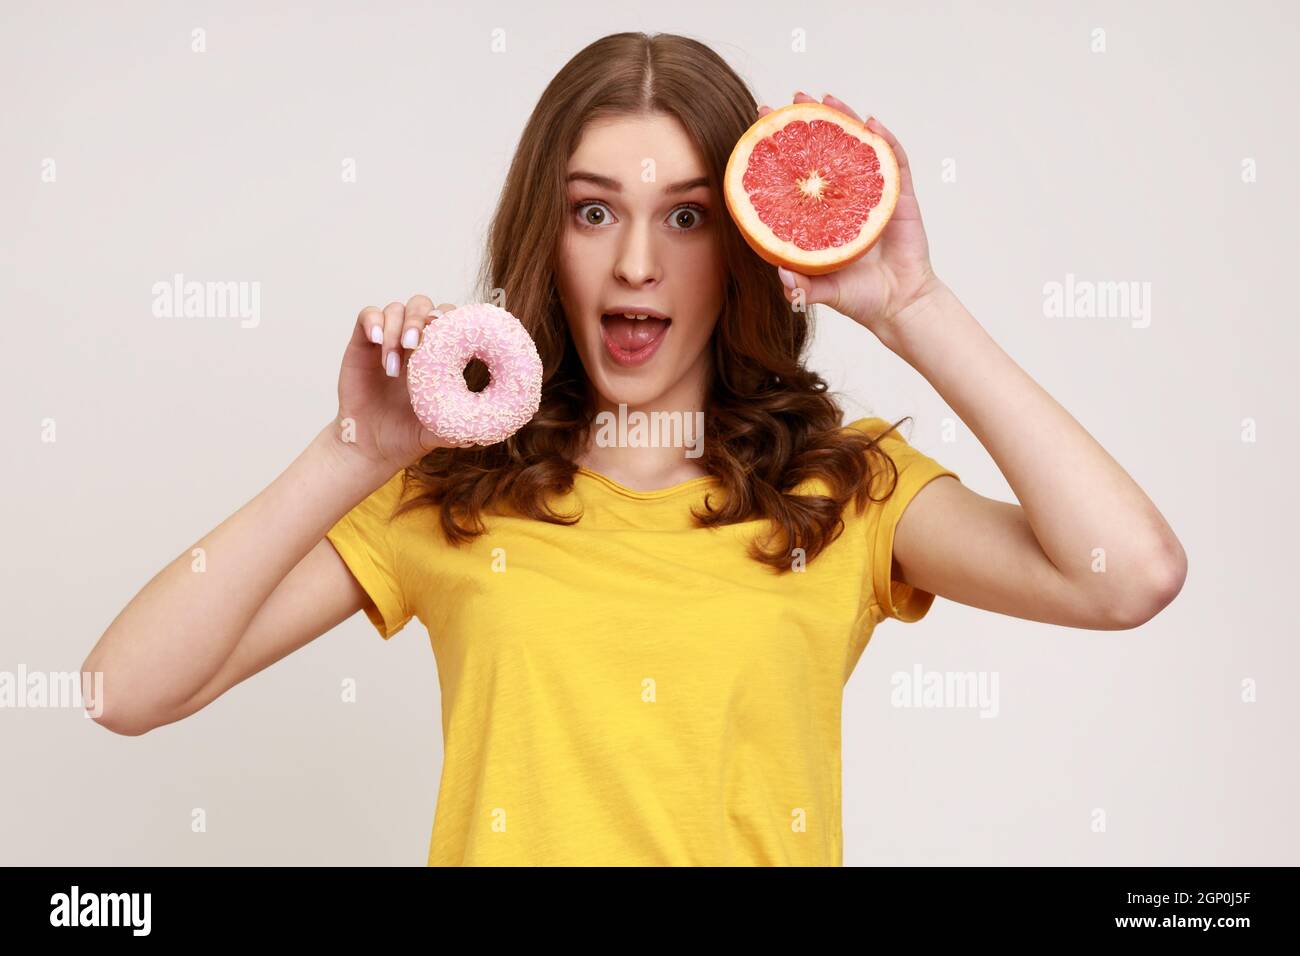 Playful excited teenager girl in yellow T-shirt holding half of ripe juicy grapefruit and round donut, looking camera with open mouth. Indoor studio shot isolated on gray background. Stock Photo